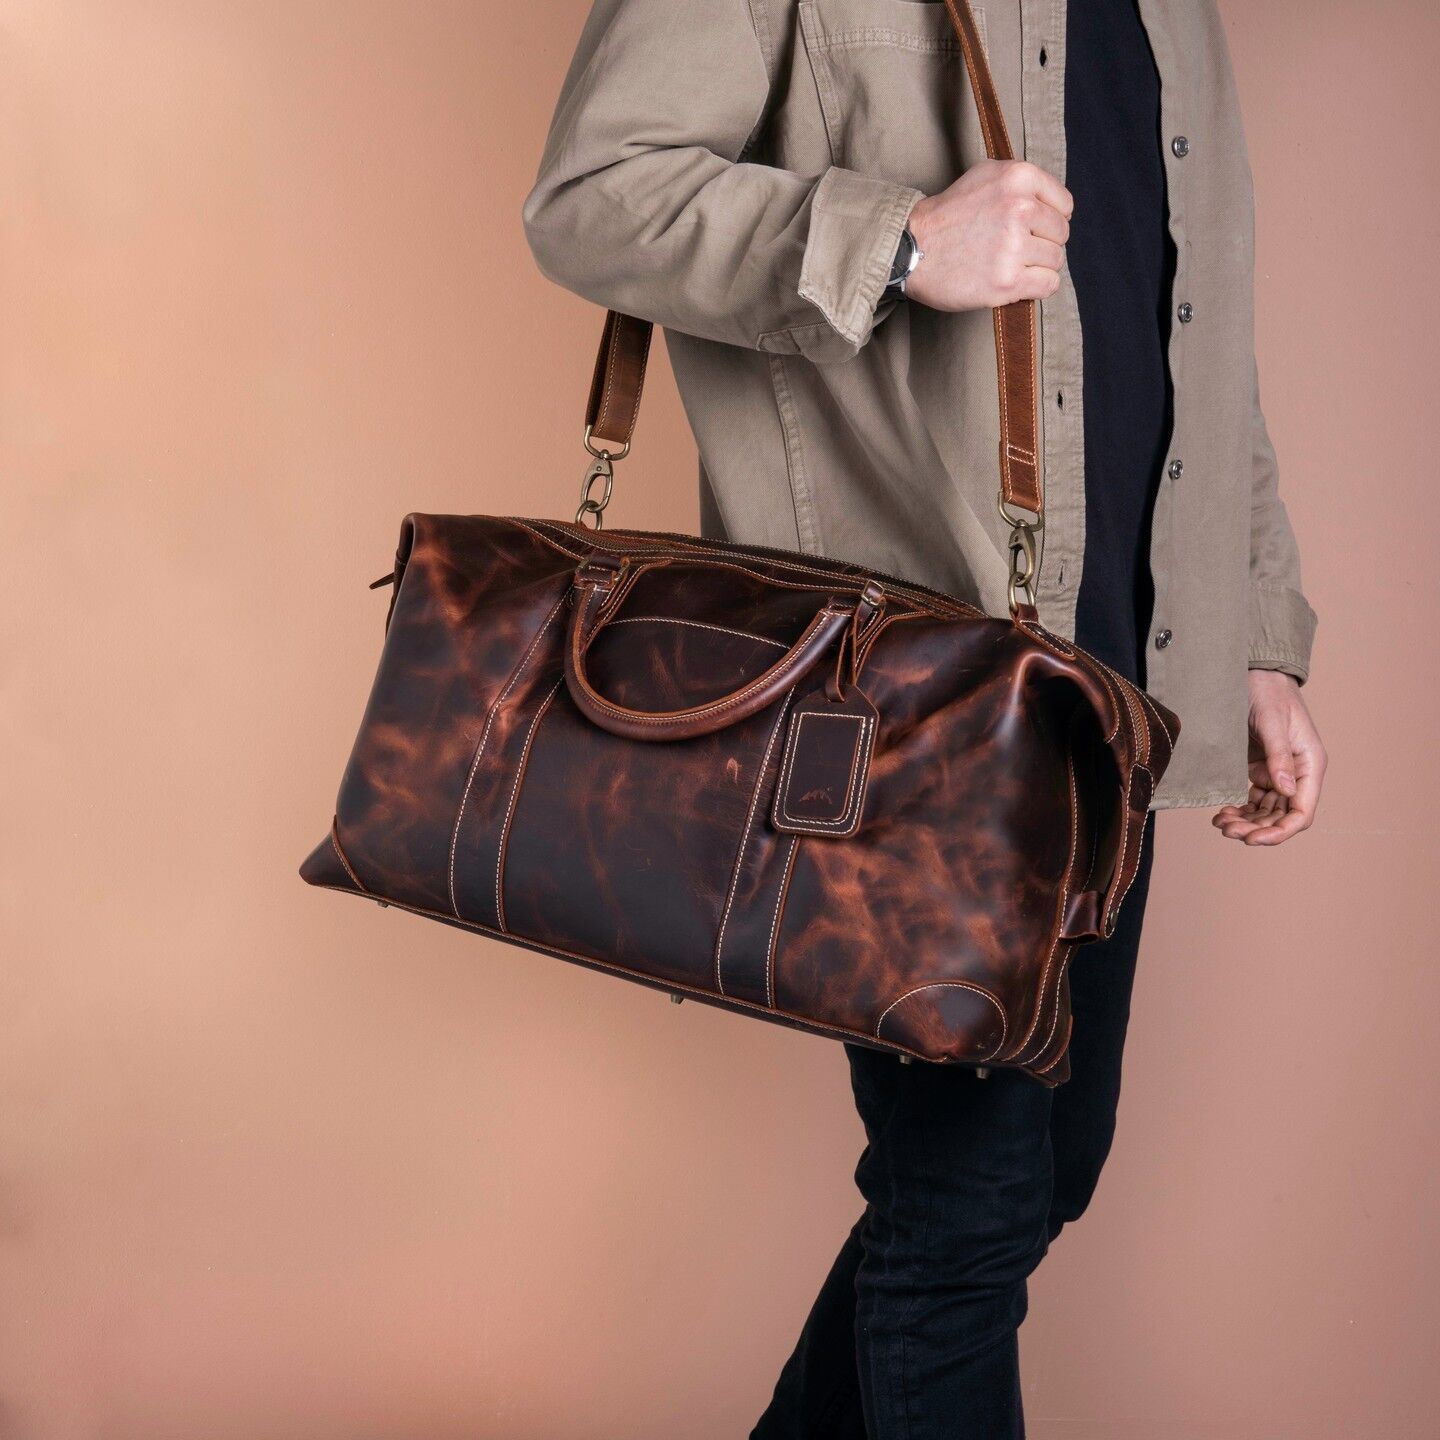 Yukonbags Avalanche Leather Duffle Bag